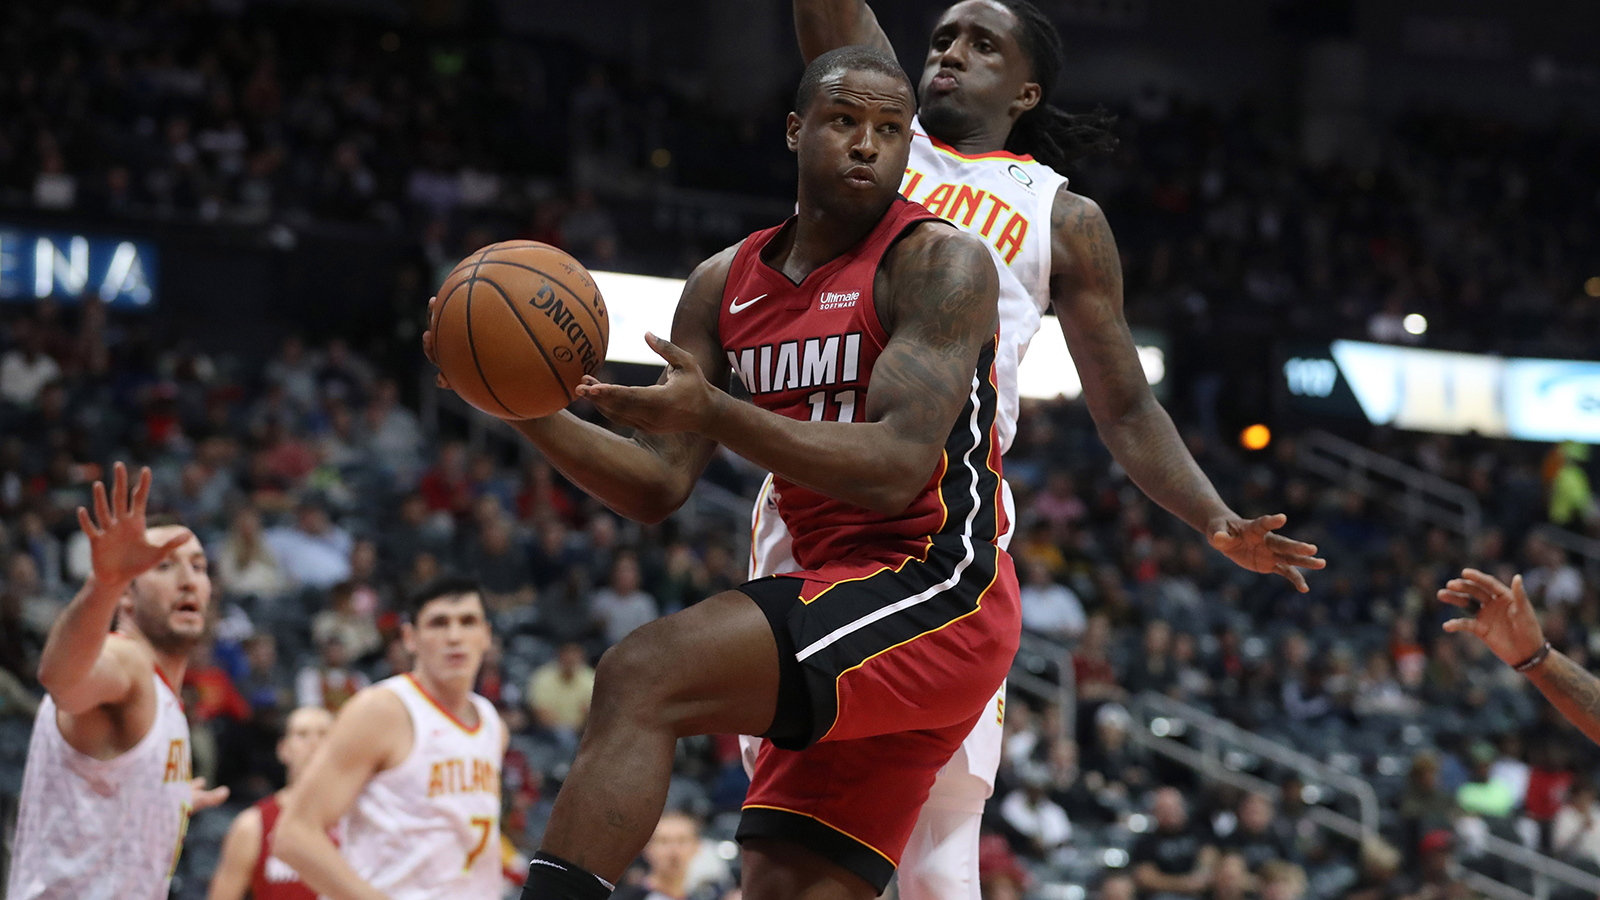 Heat guard Dion Waiters has successful ankle surgery, ruled out for remained of season